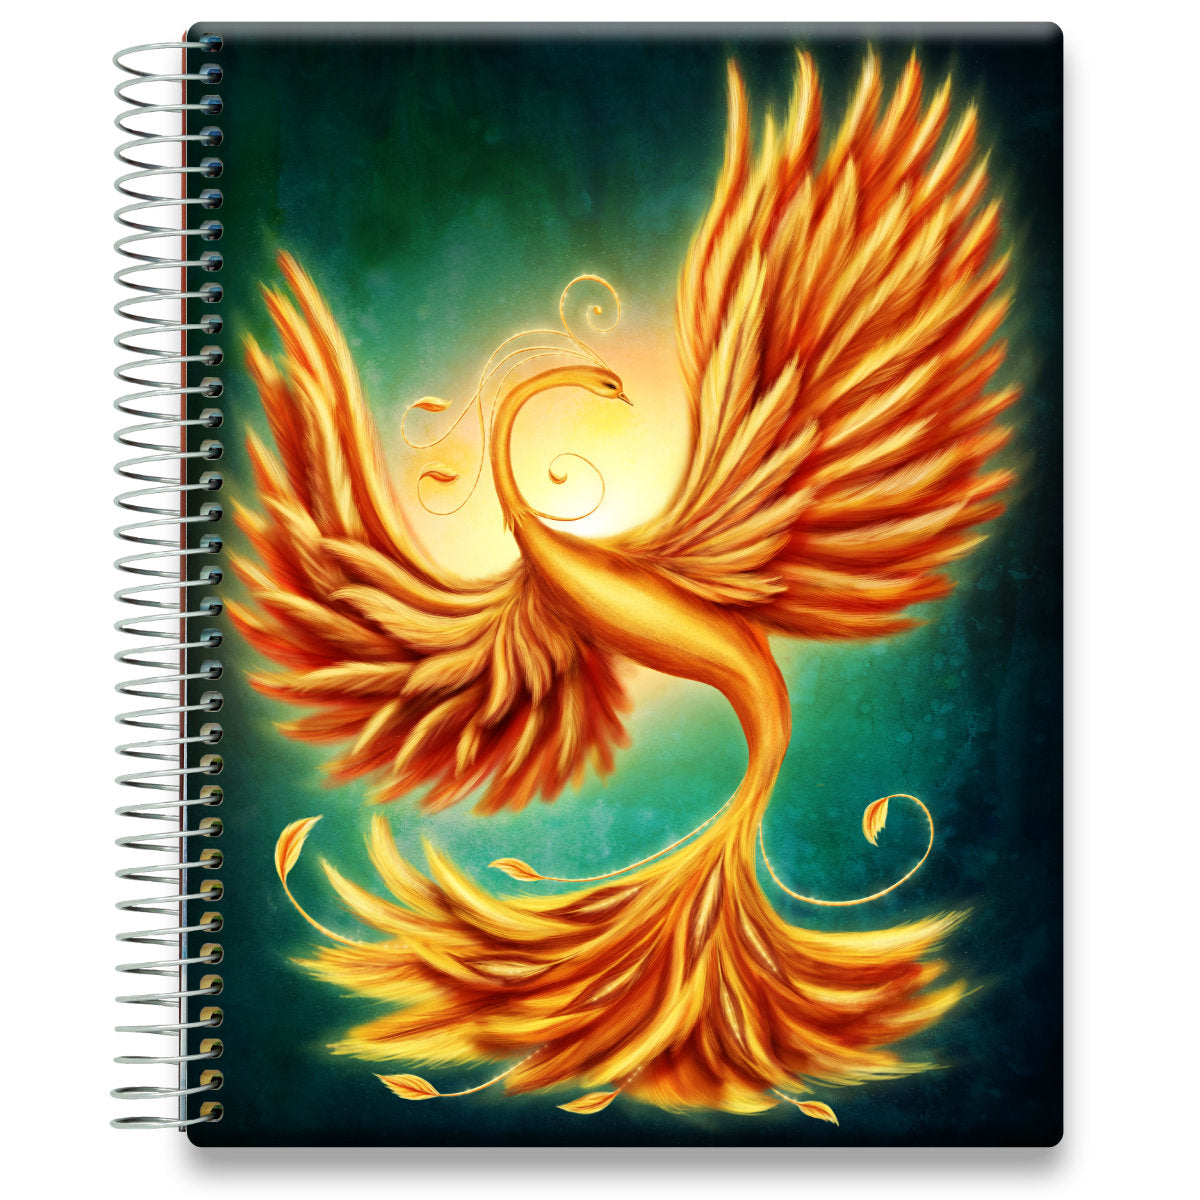 Coaching Session + Oct 2024 to Dec 2025 Planner - Phoenix Rising